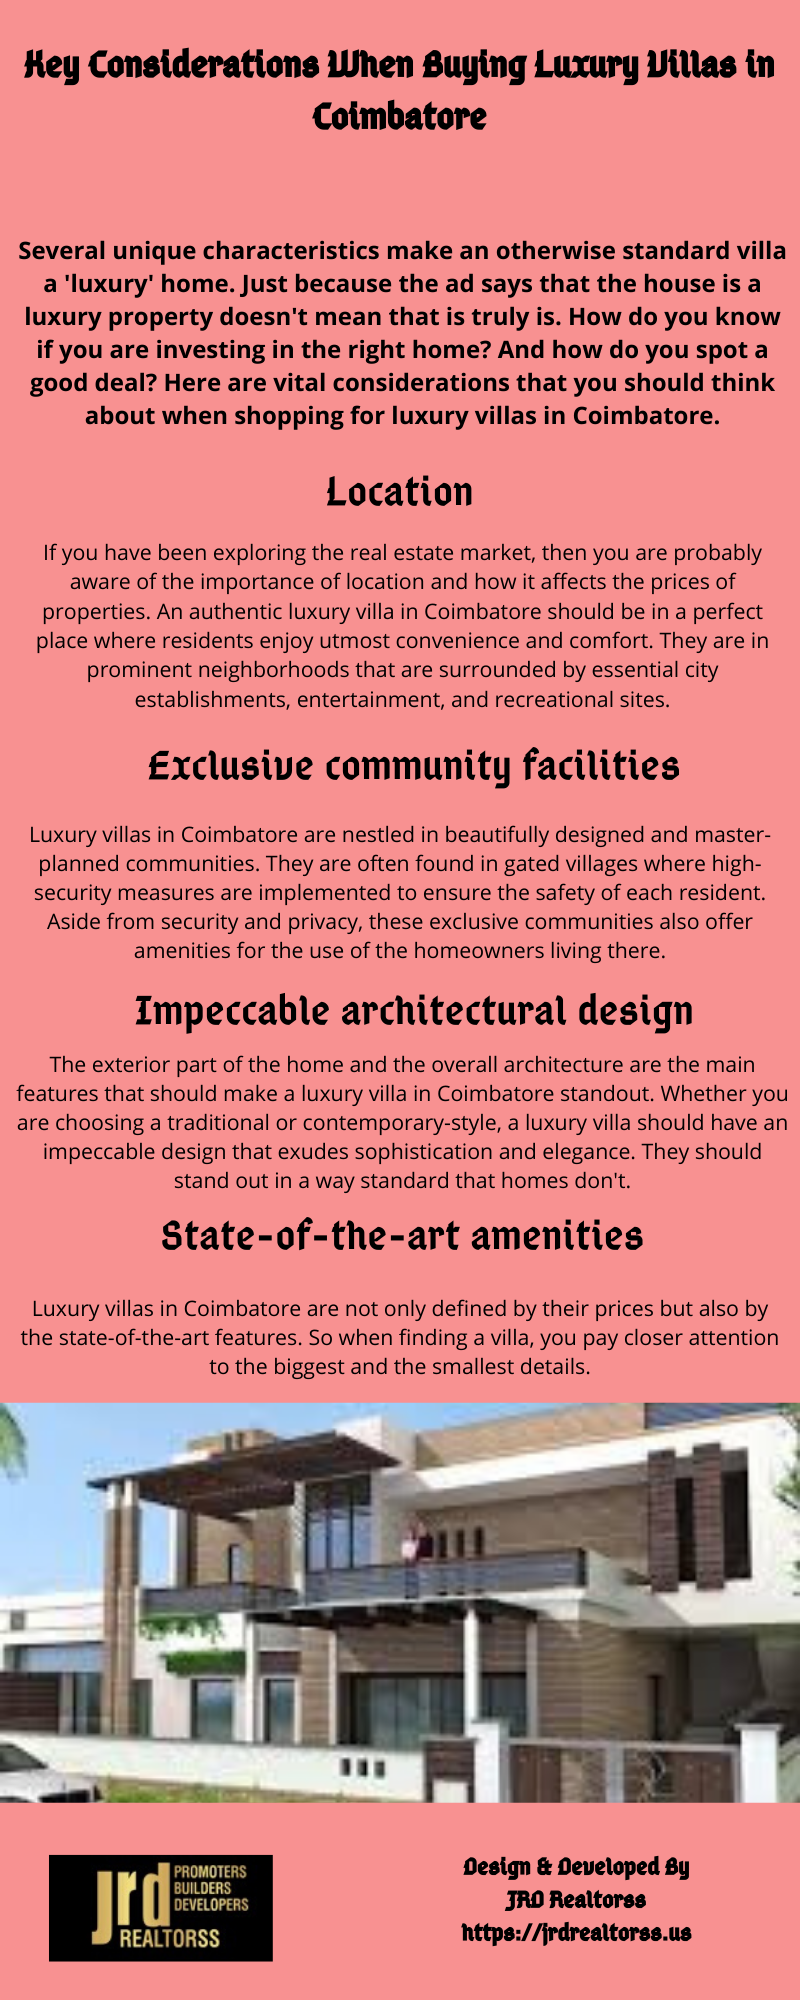 Key Considerations When Buying Luxury Villas in Coimbatore.png  by Jrdrealtorssus